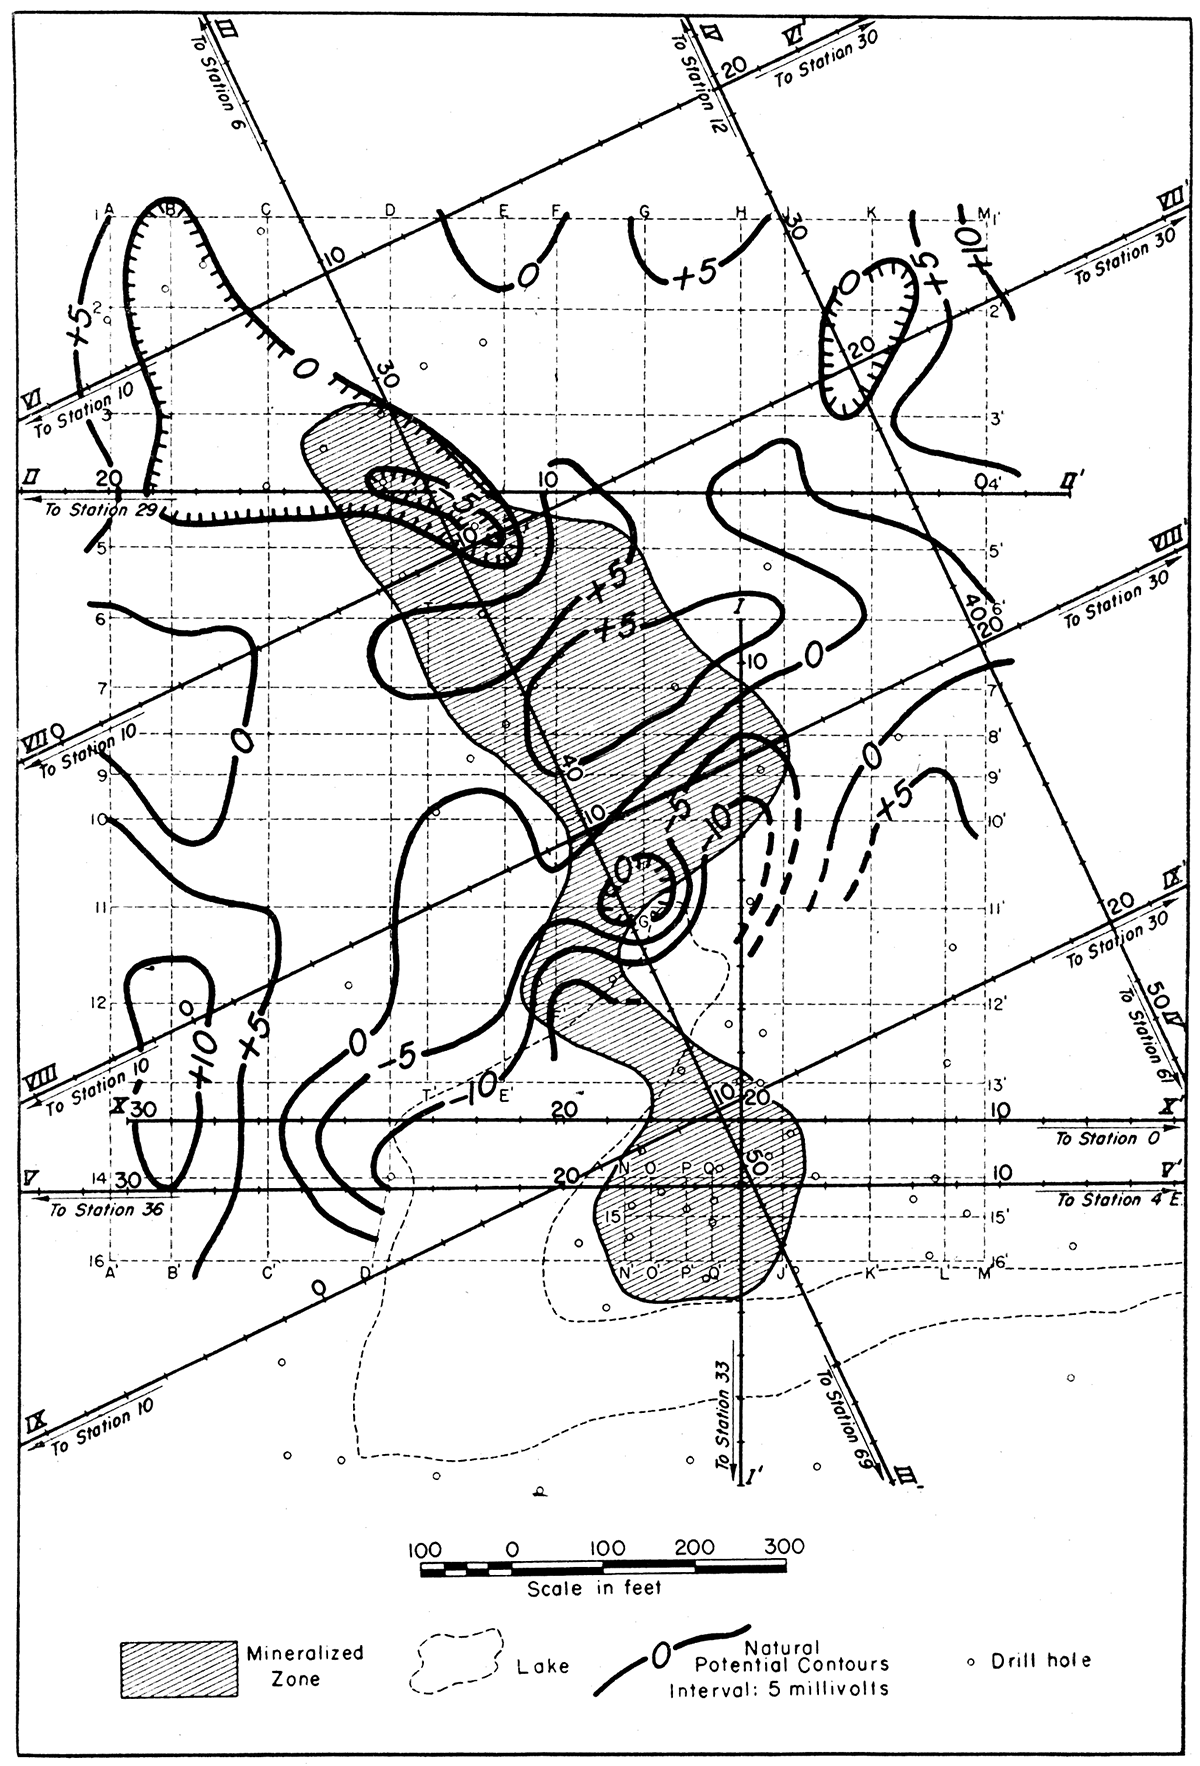 Map showing natural potential contours in the Walton area.